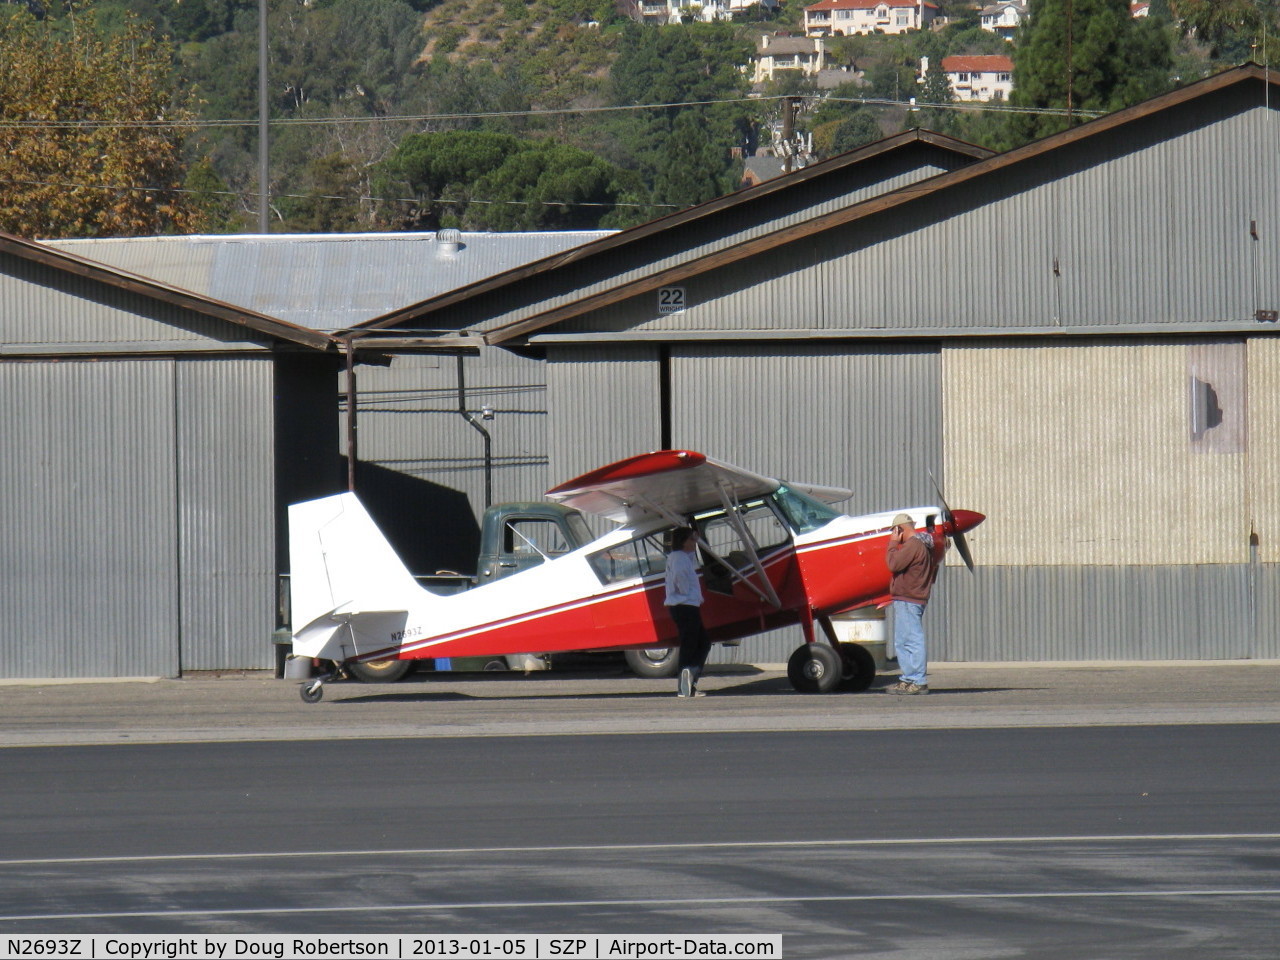 N2693Z, 1978 Bellanca 8GCBC C/N 268-78, 1978 Bellanca 8GCBC SCOUT, Lycoming O&VO-360 180 Hp, newly recovered and re-finished at Rowena's Flying Fabric Company